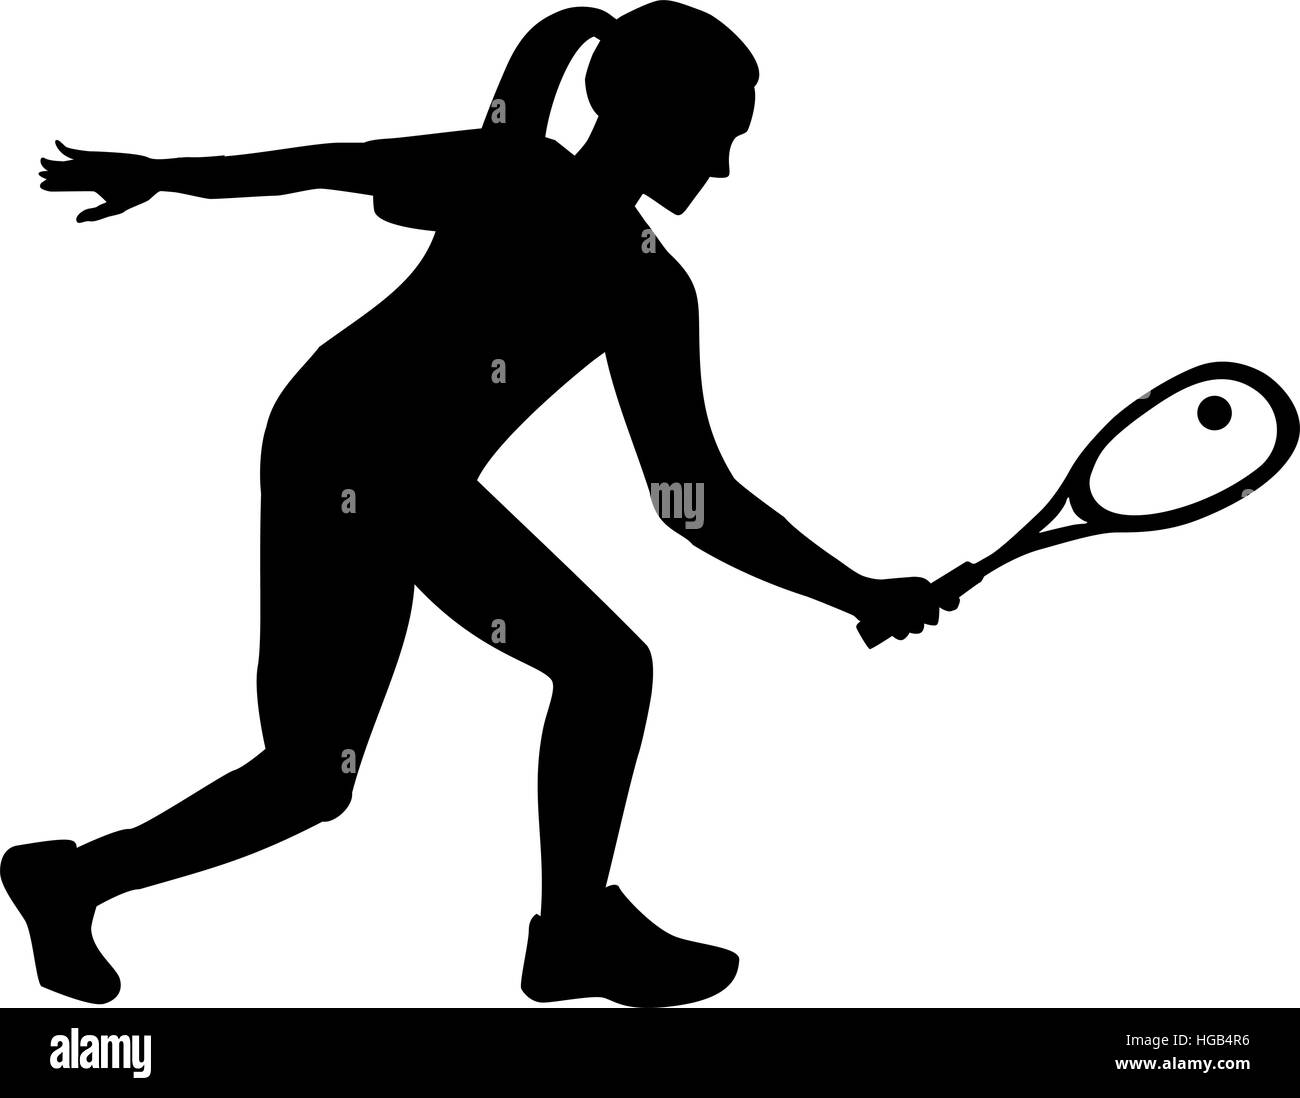 Woman playing squash silhouette Stock Vector